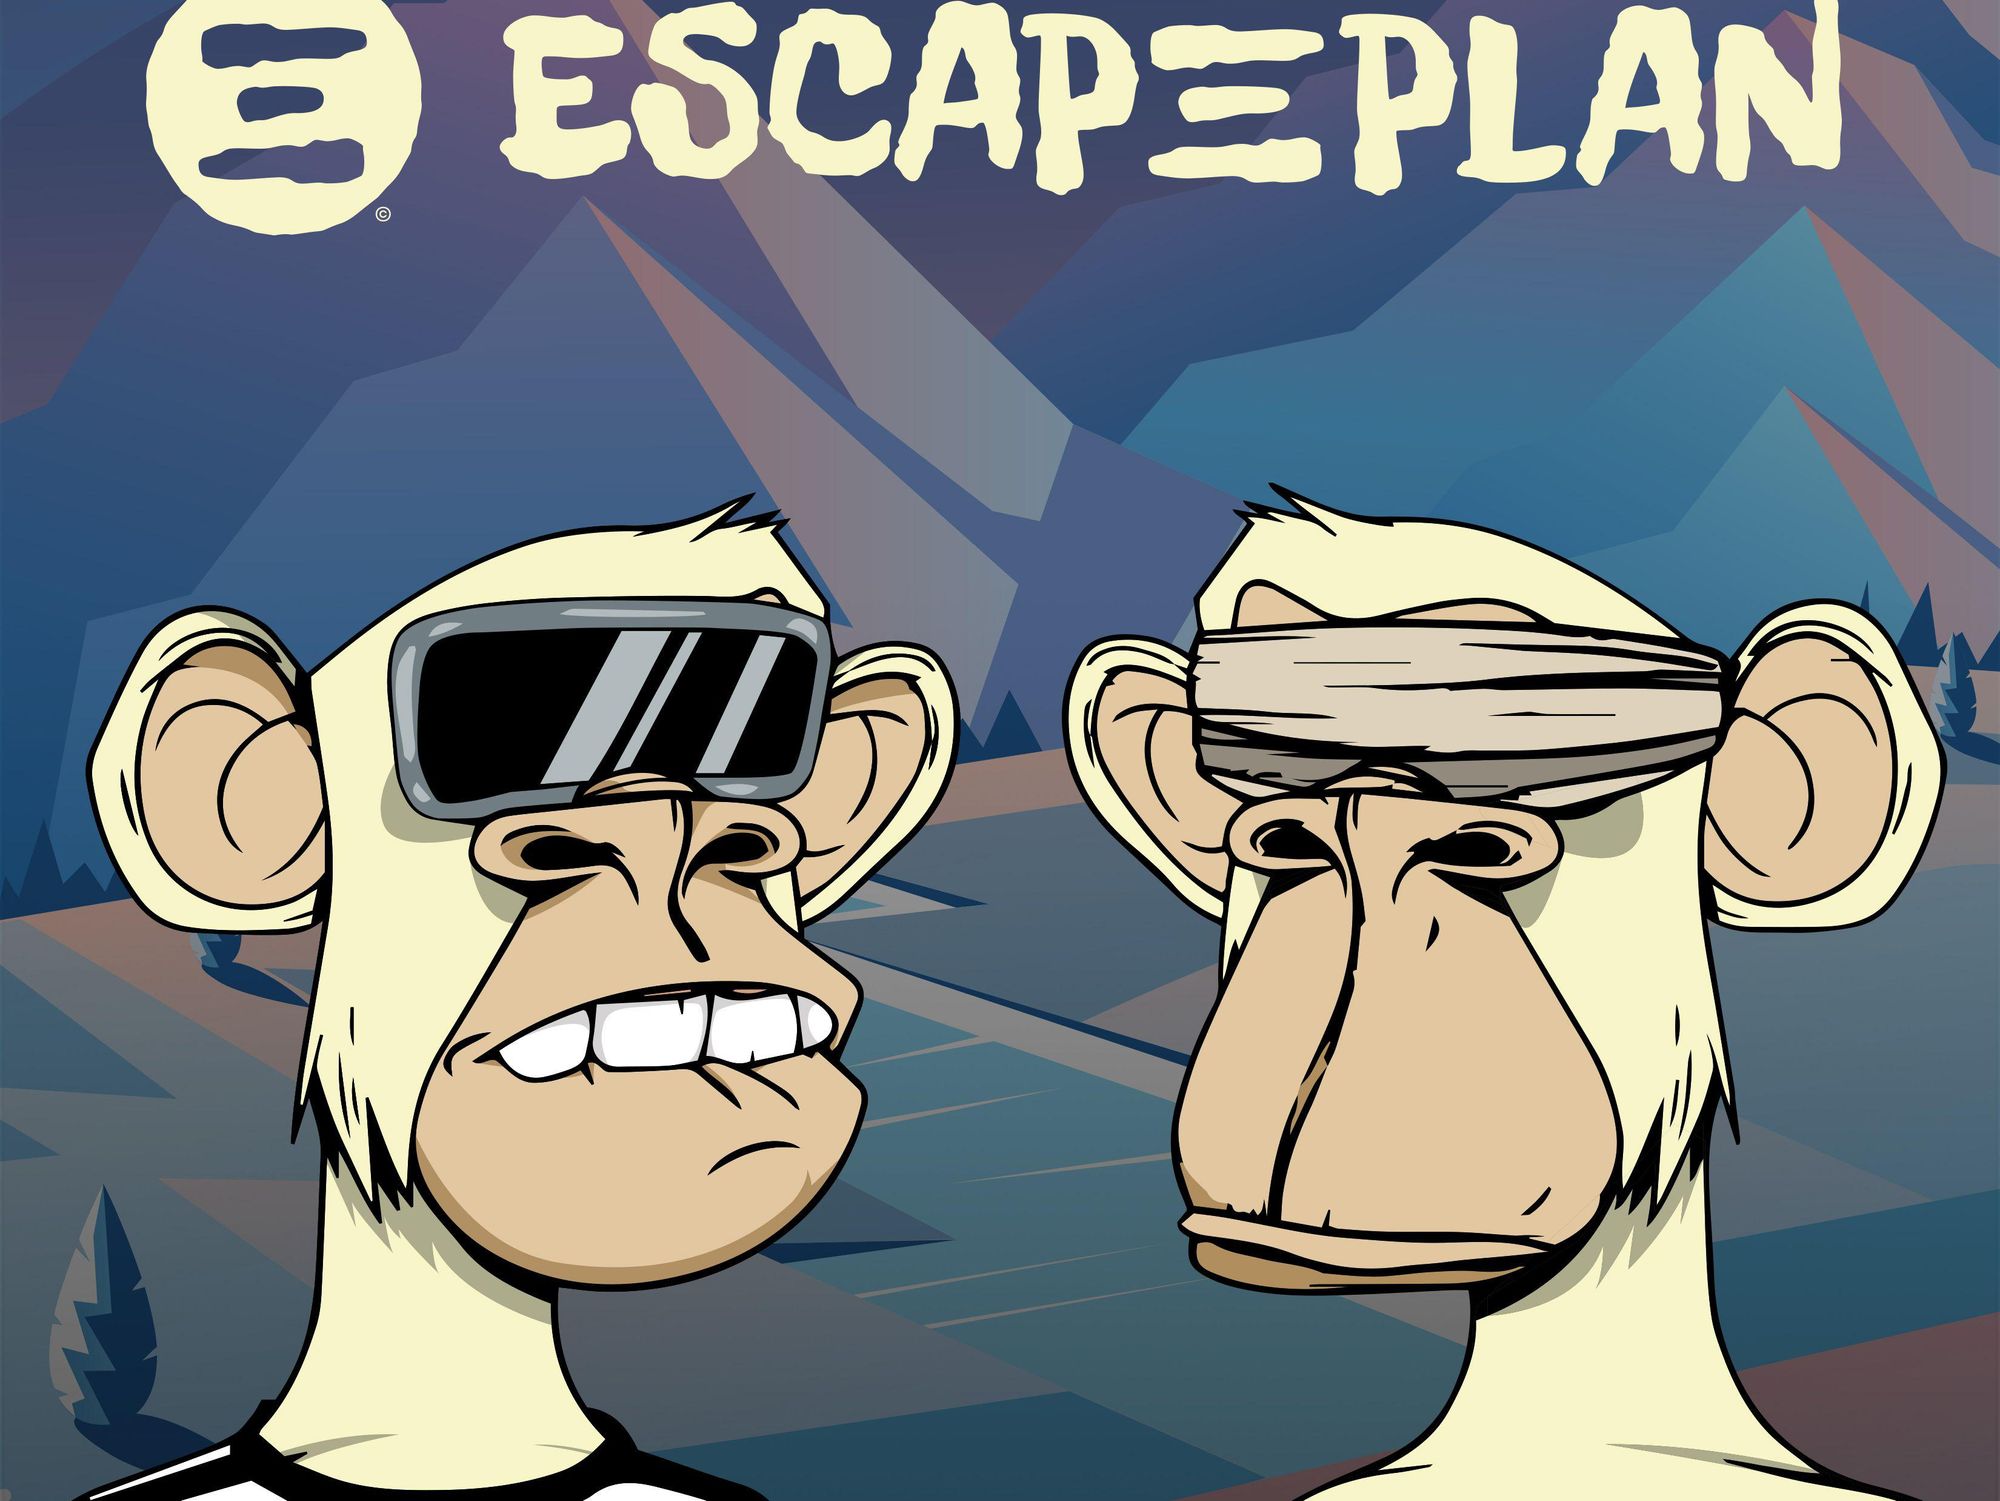 ​Escapeplan, a DJ and producer comprised of two acres from Bored Ape Yacht Club.